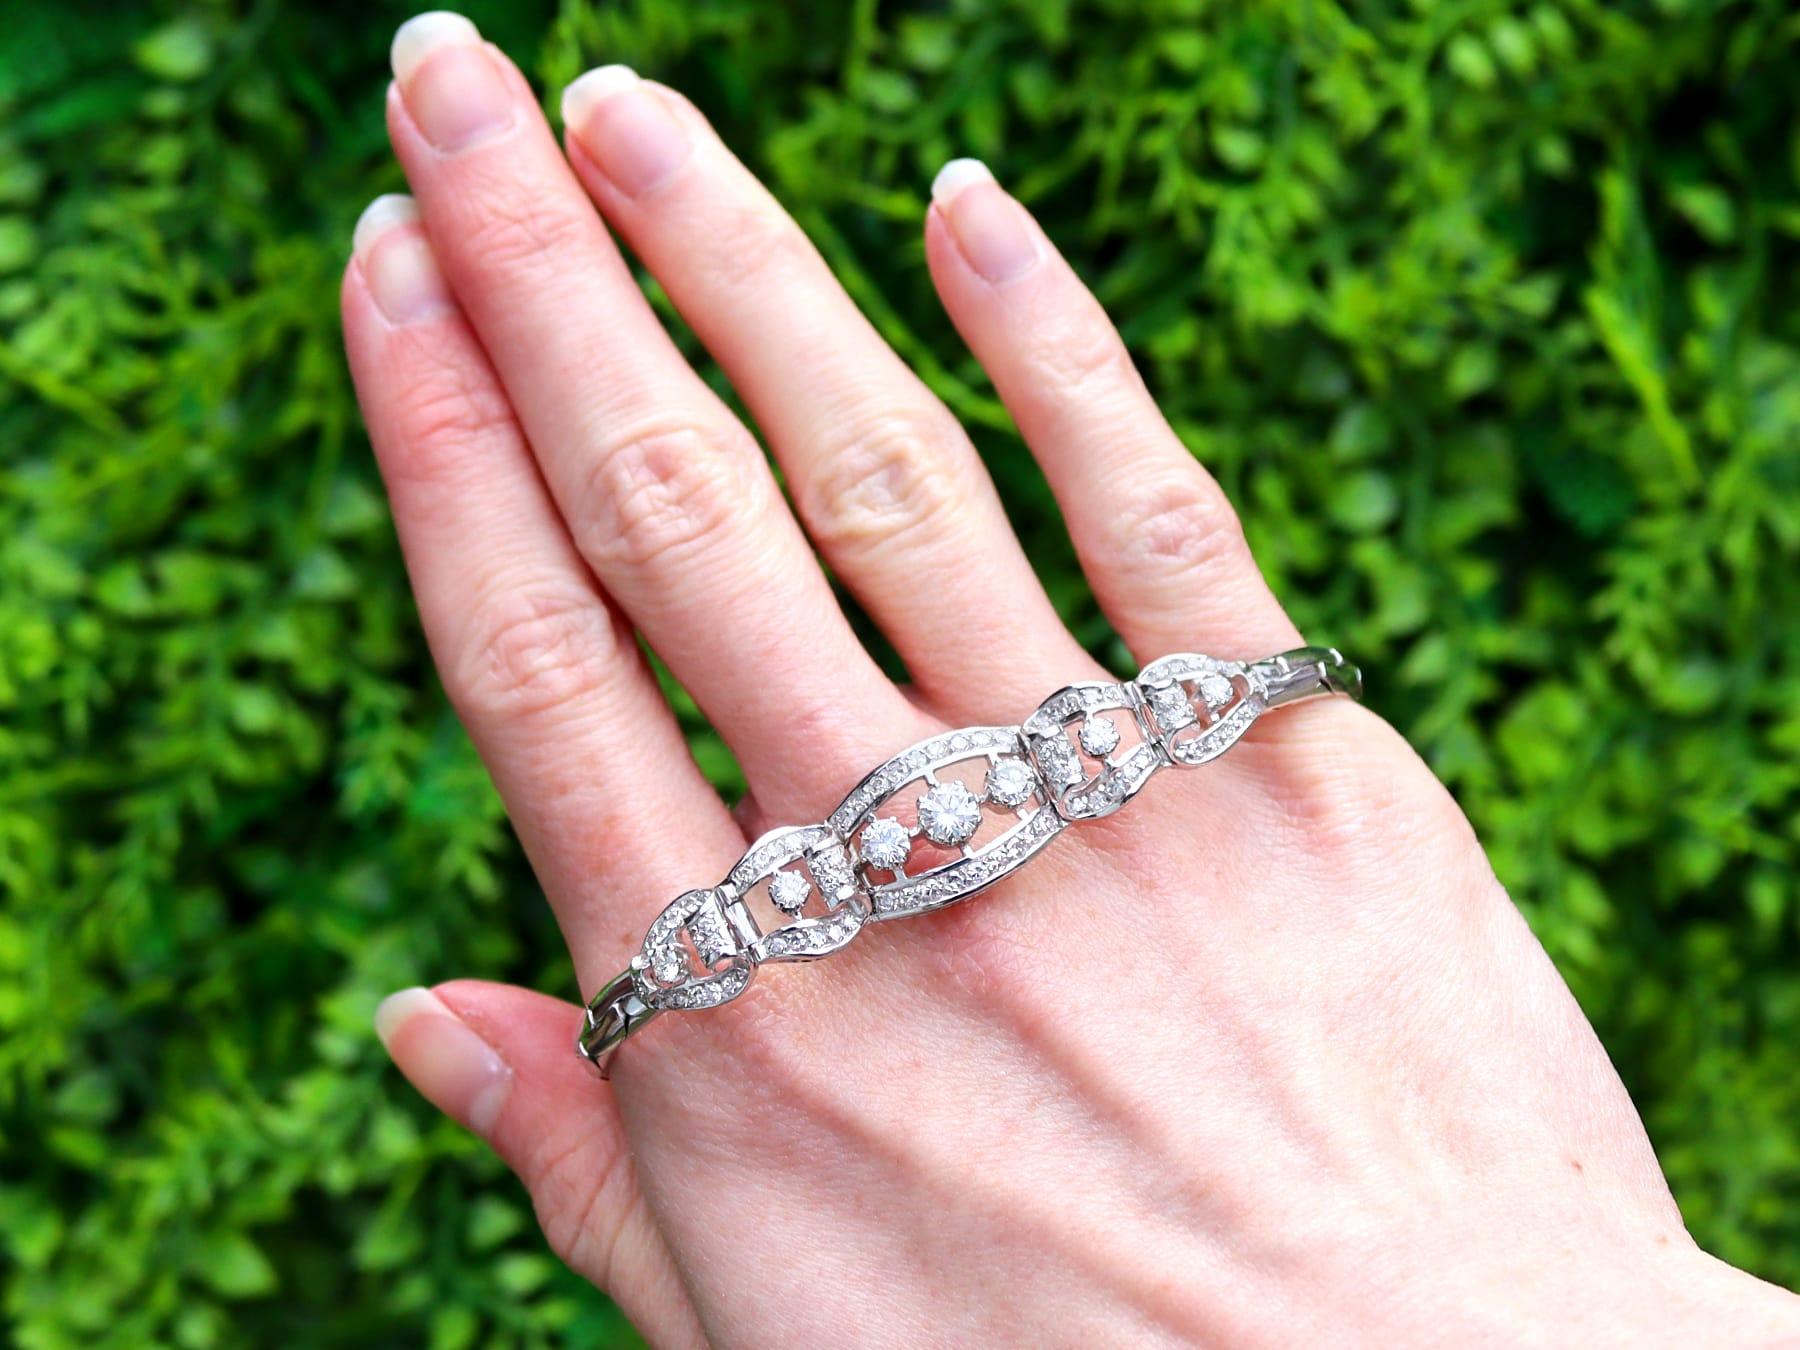 A fine and impressive antique 2.47 carat diamond and 18 karat white gold bracelet; part of our antique diamond jewellery and estate jewelry collections.

This fine and impressive antique diamond bracelet has been crafted in 18k white gold.

The